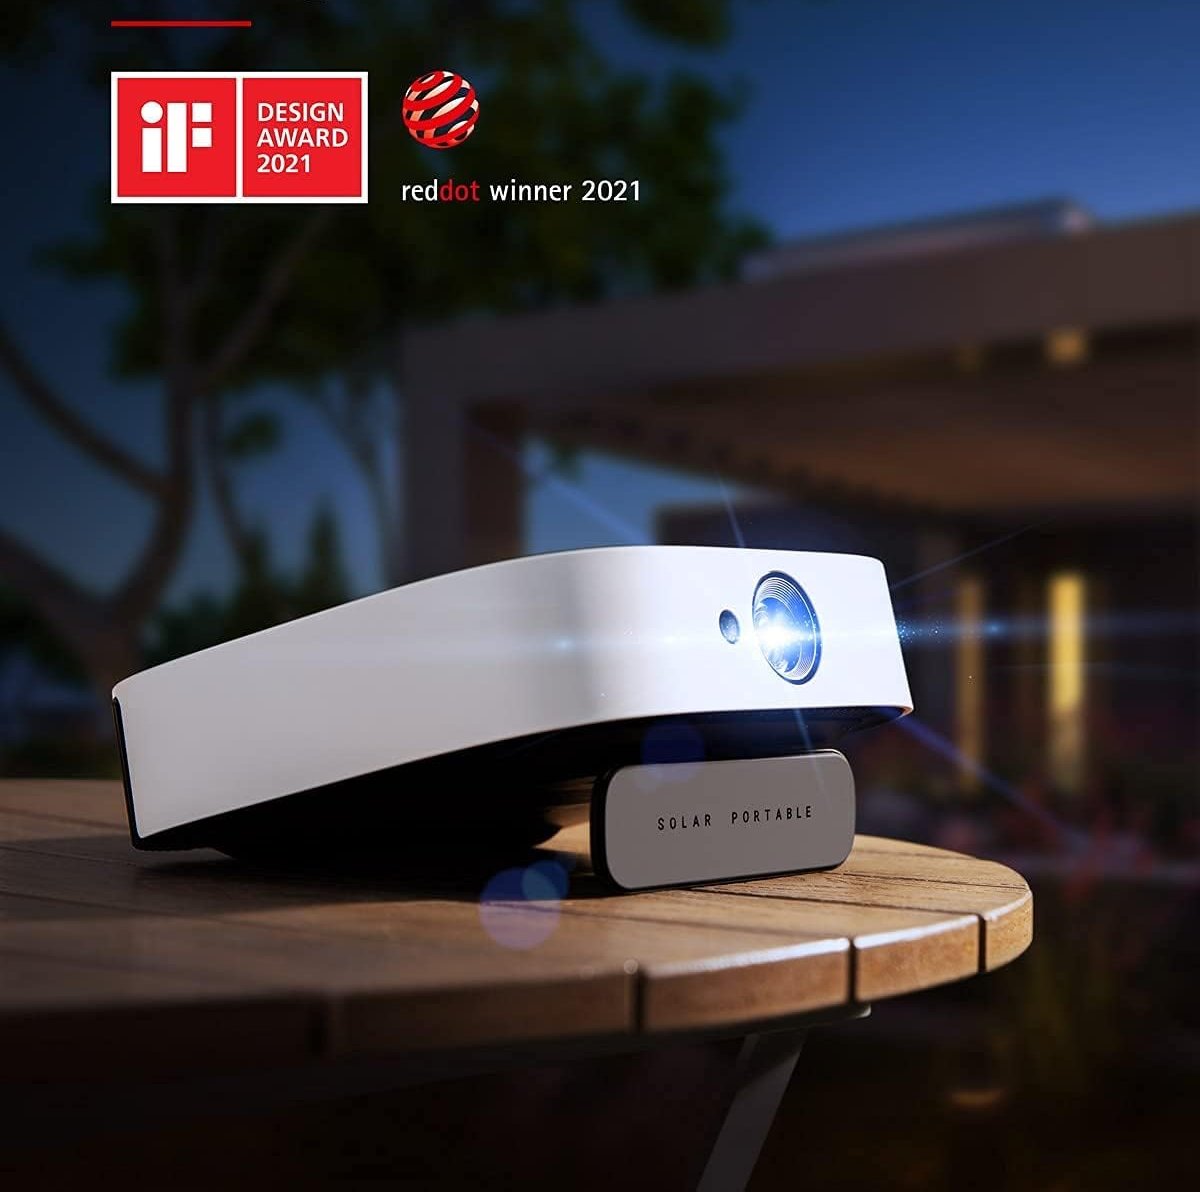 nebula-by-anker-solar-portable-projector